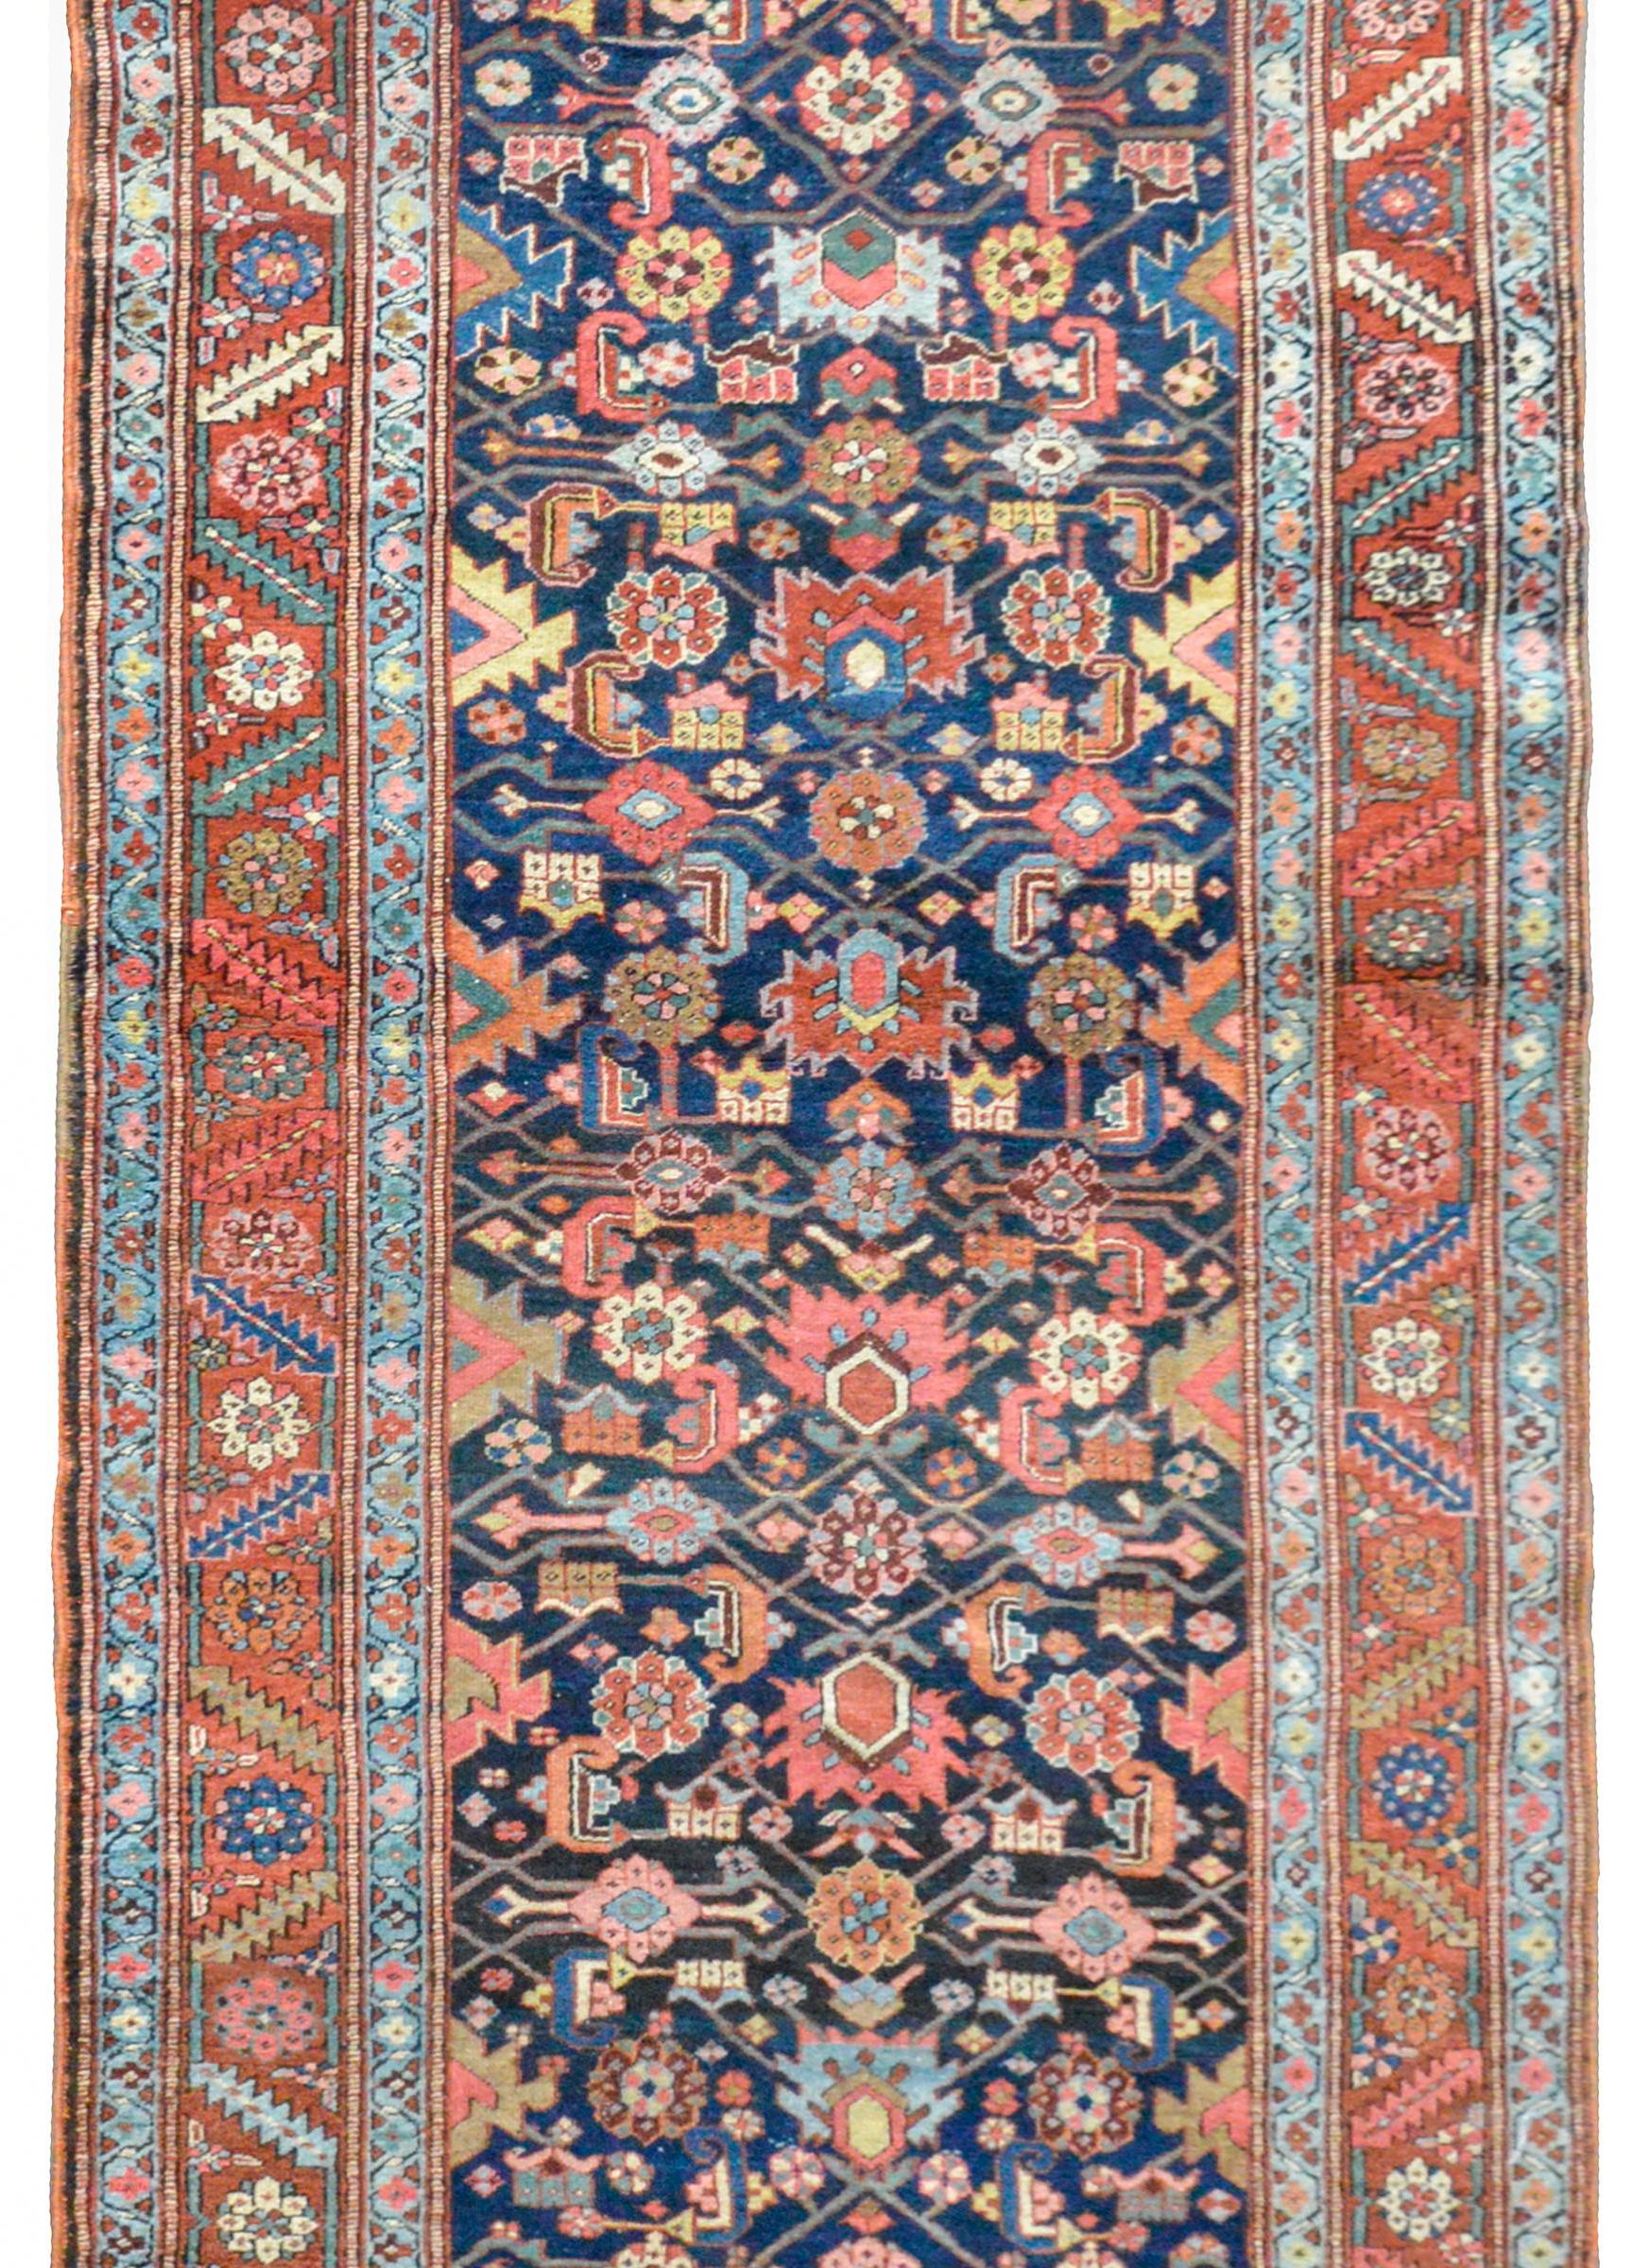 An outstanding early 20th century Persian Heriz runner with a bold stylized floral lattice pattern woven in light indigo, crimson, coral, gold, and crimson, all against a dark indigo background. The border is exceptional with a stylized leaf and